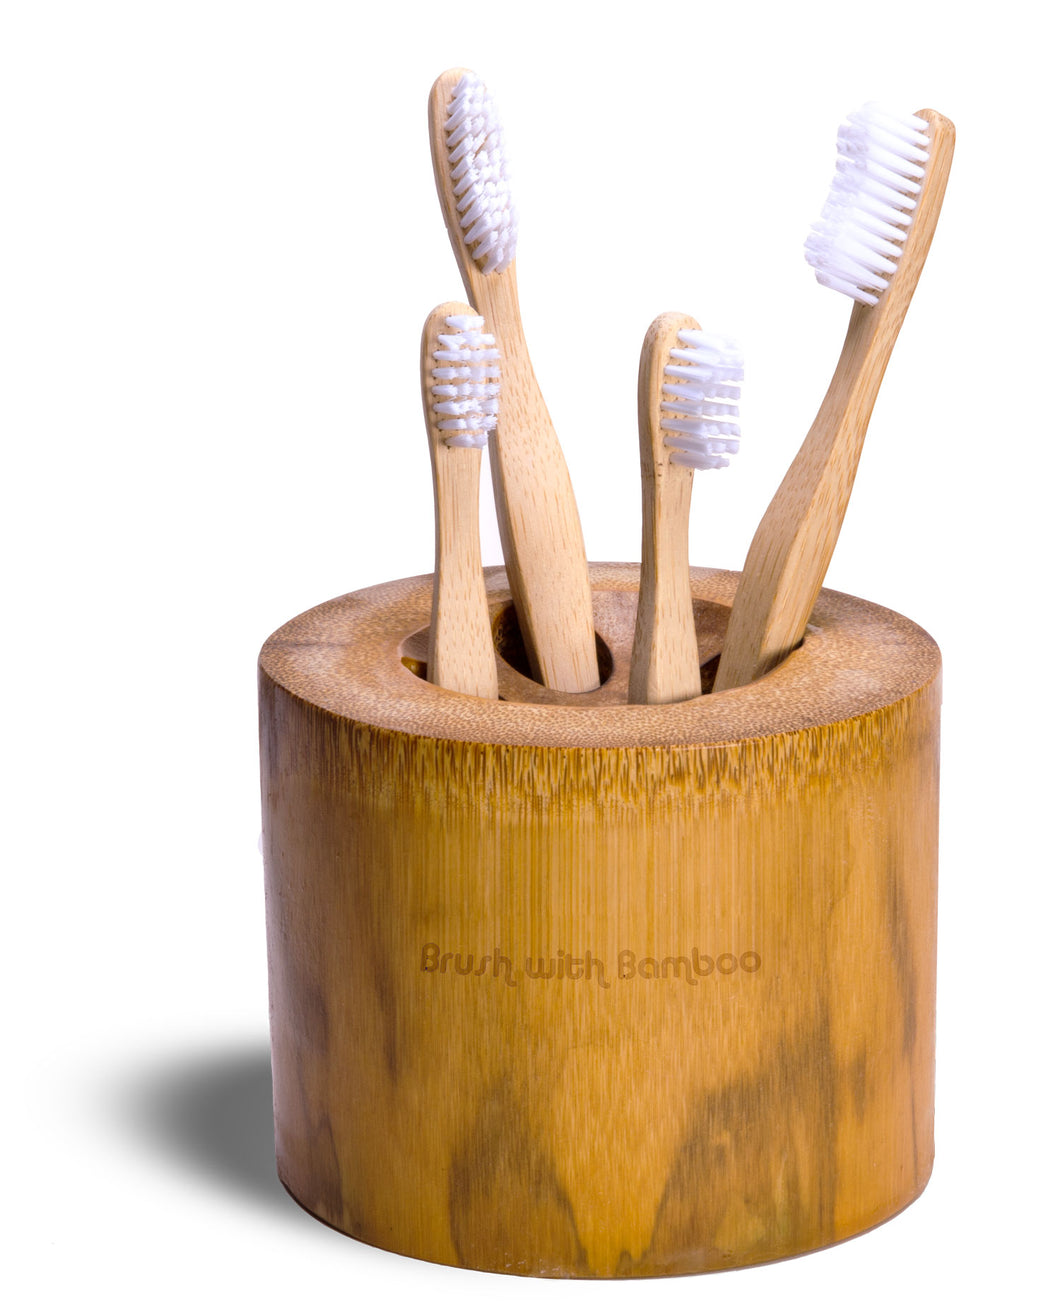 Bamboo tooth brush holder with brushes